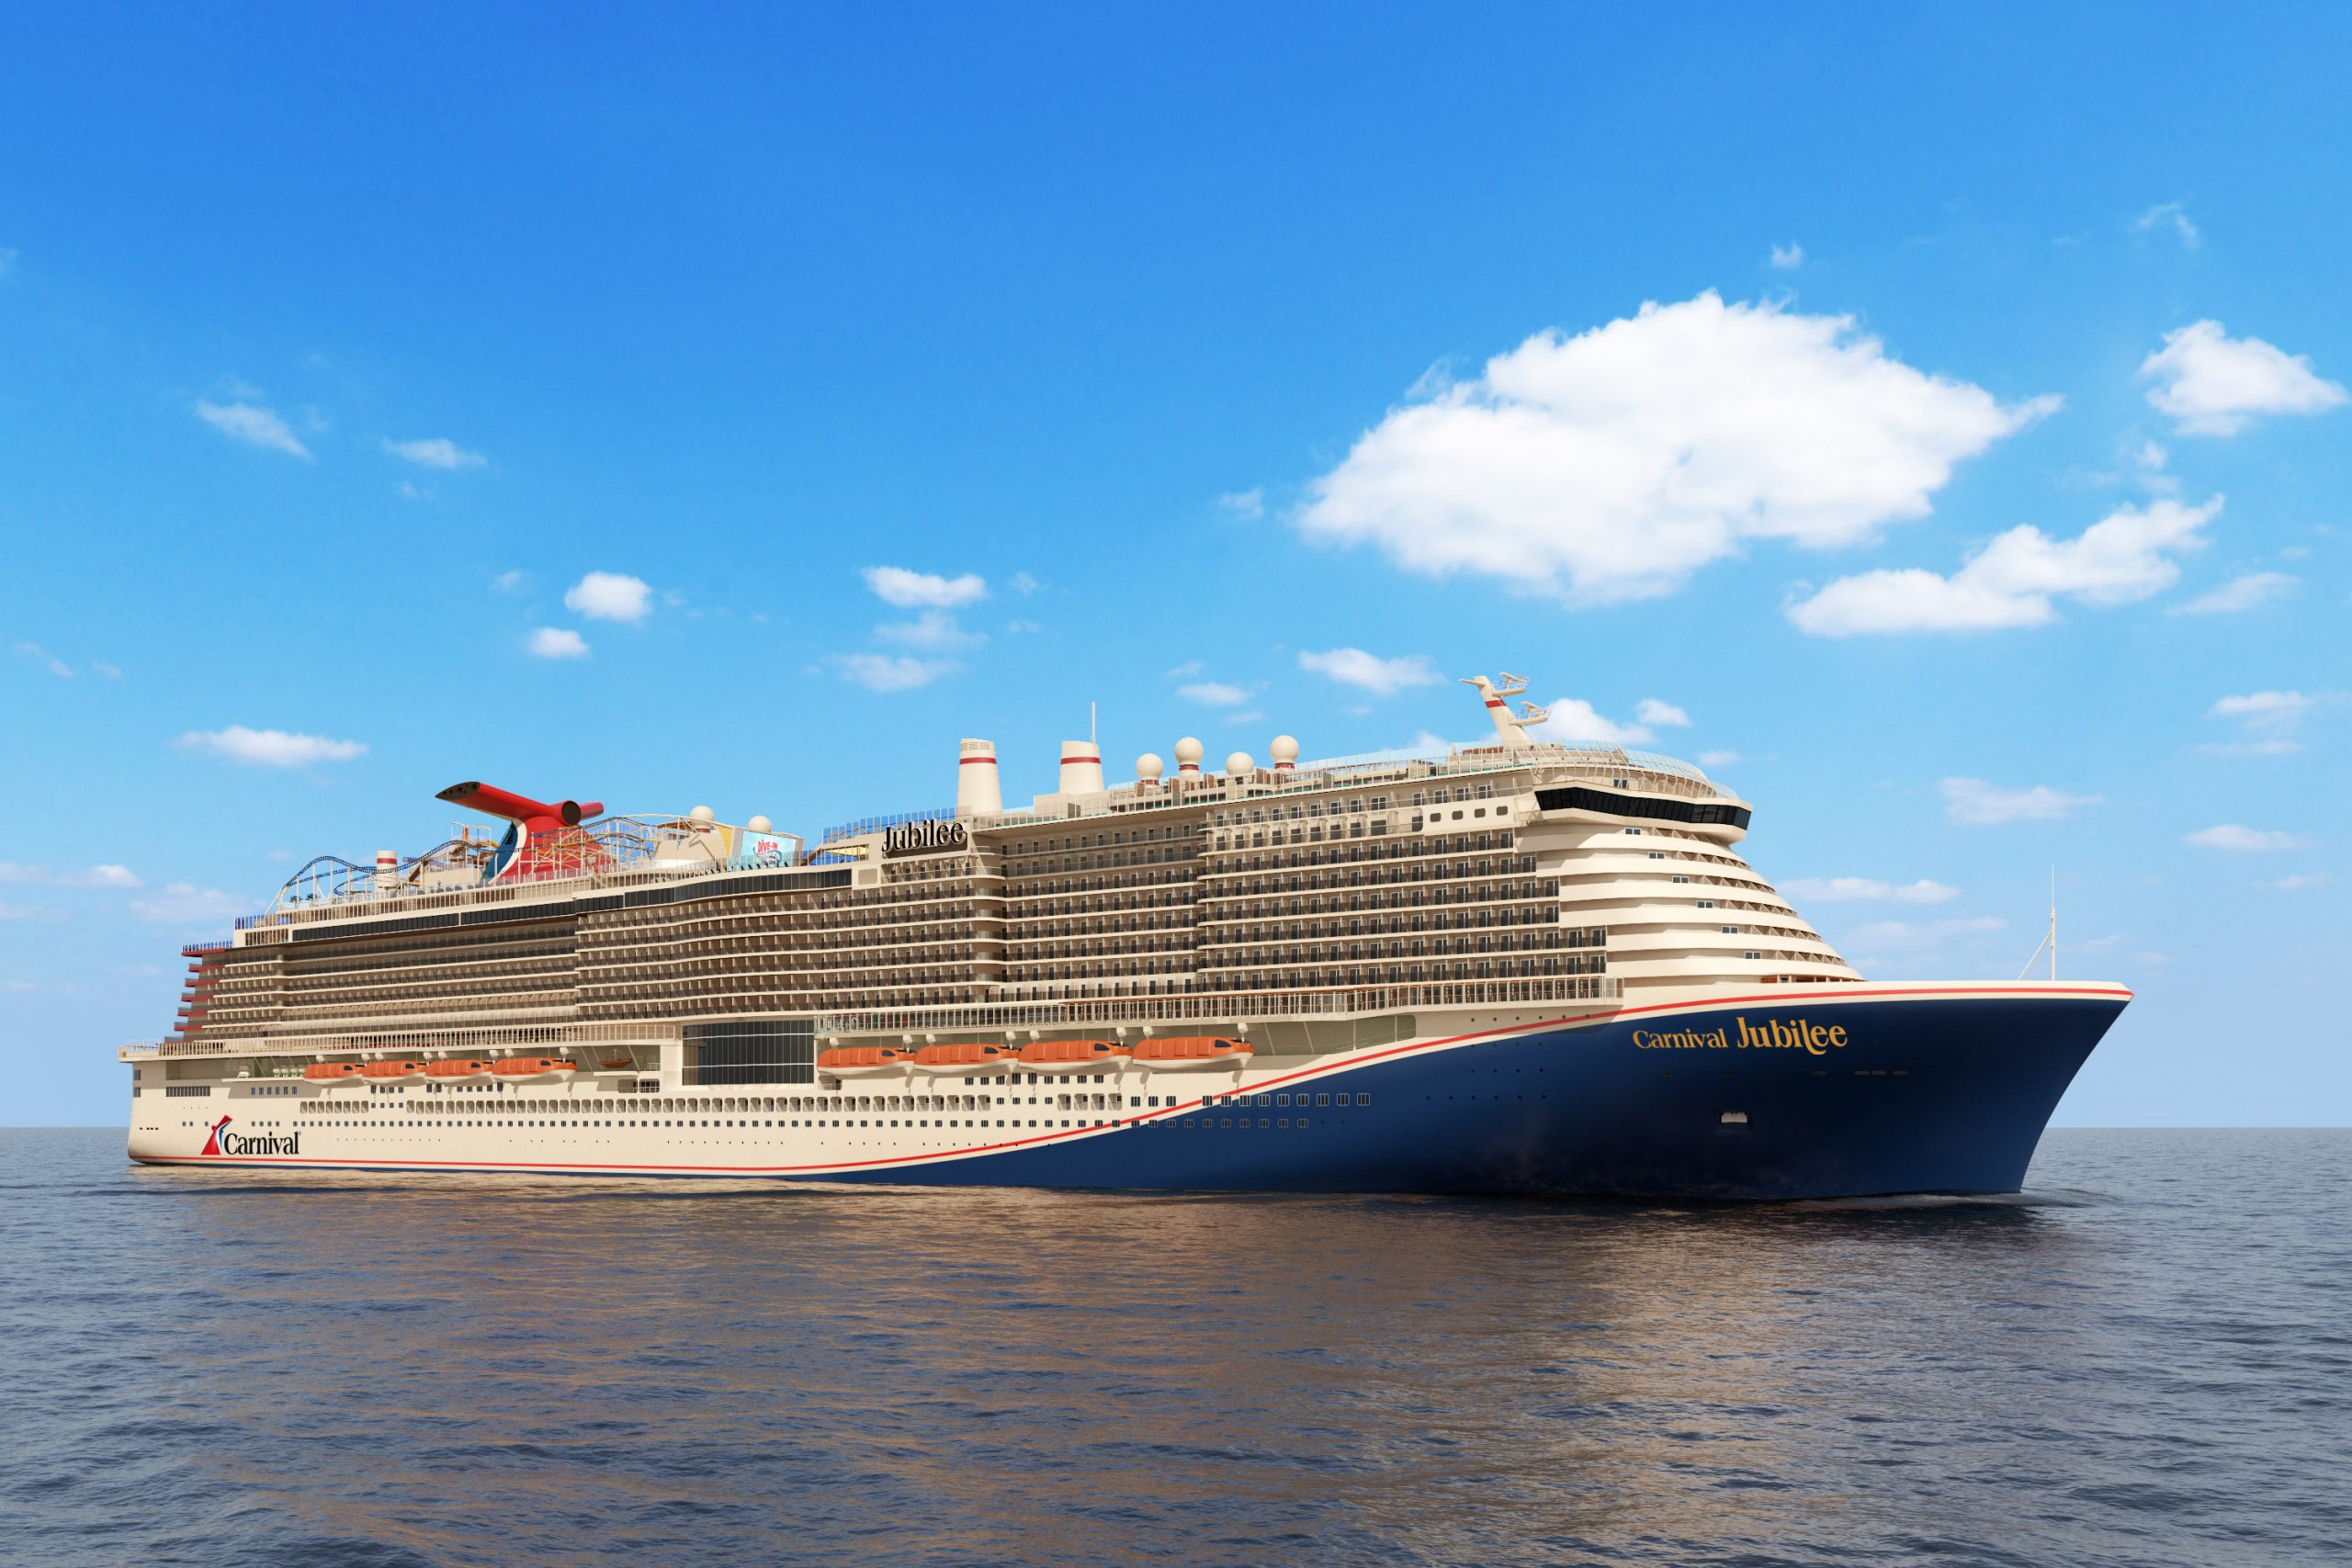 These New Cruise Ships Are Making Waves